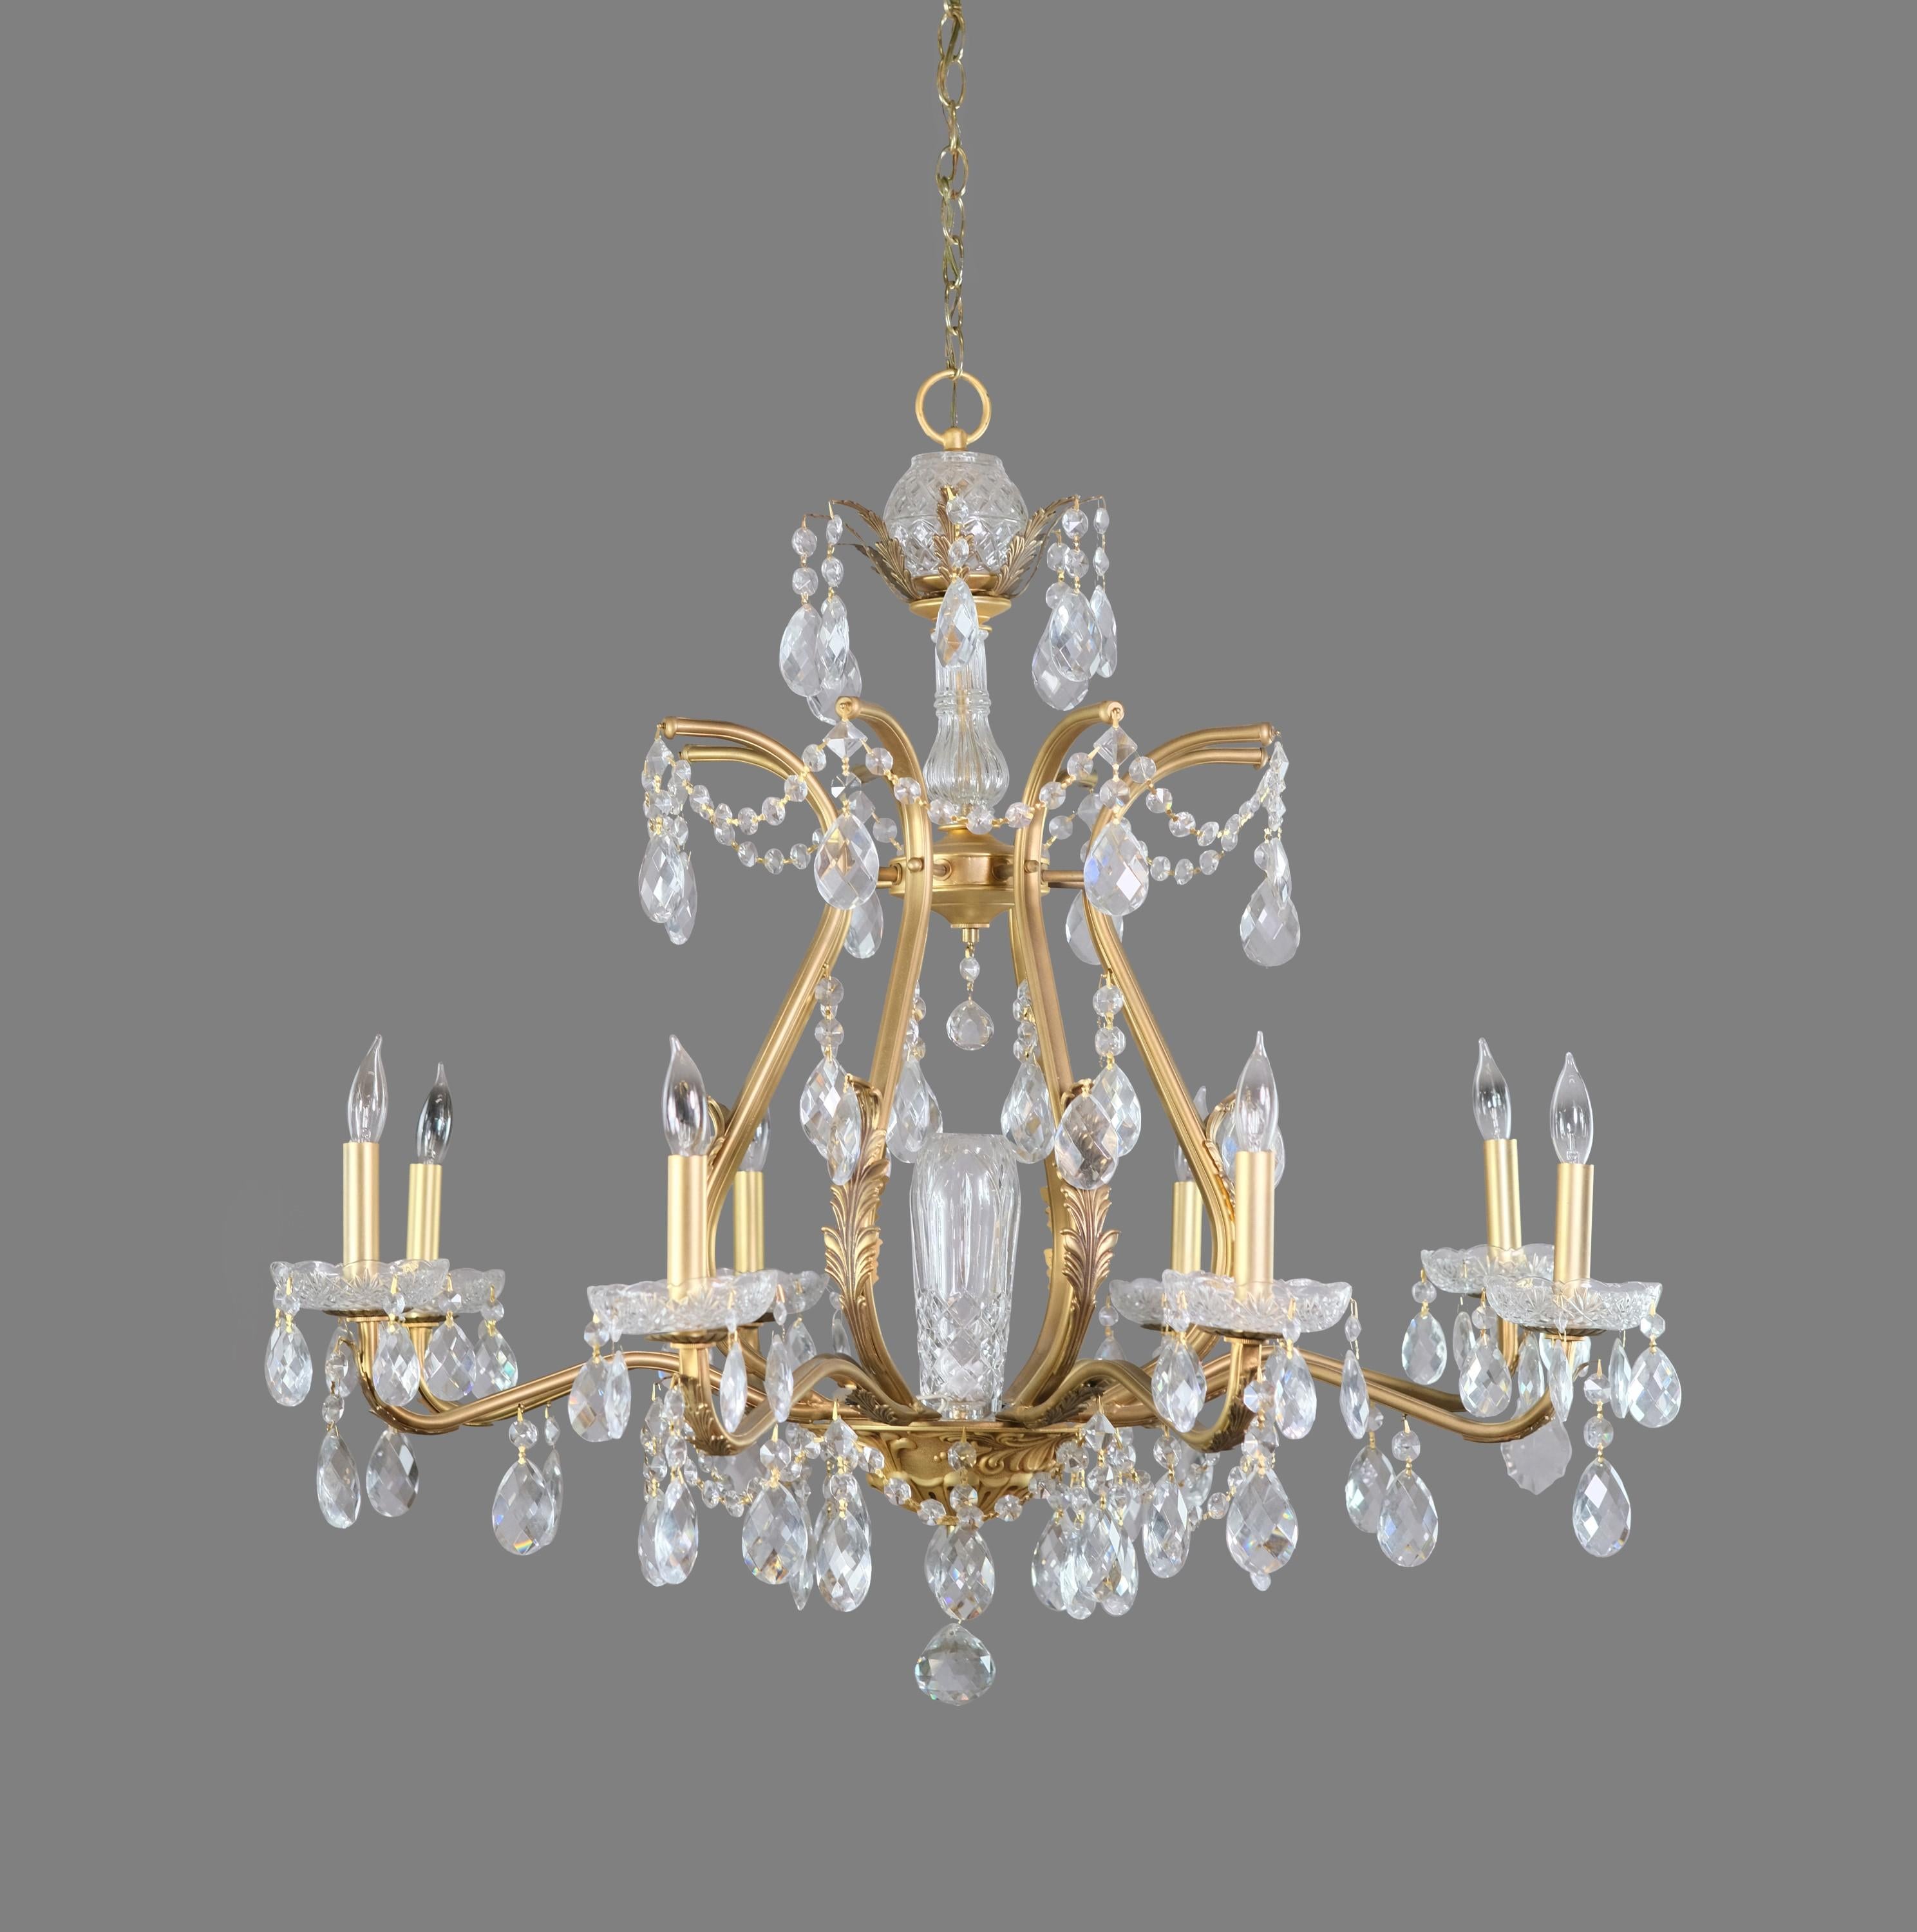 Restored Early 20th century gilt chandelier. Features eight arms dripping with crystals. Cleaned and rewired. Please note, this item is located in one of our NYC locations.